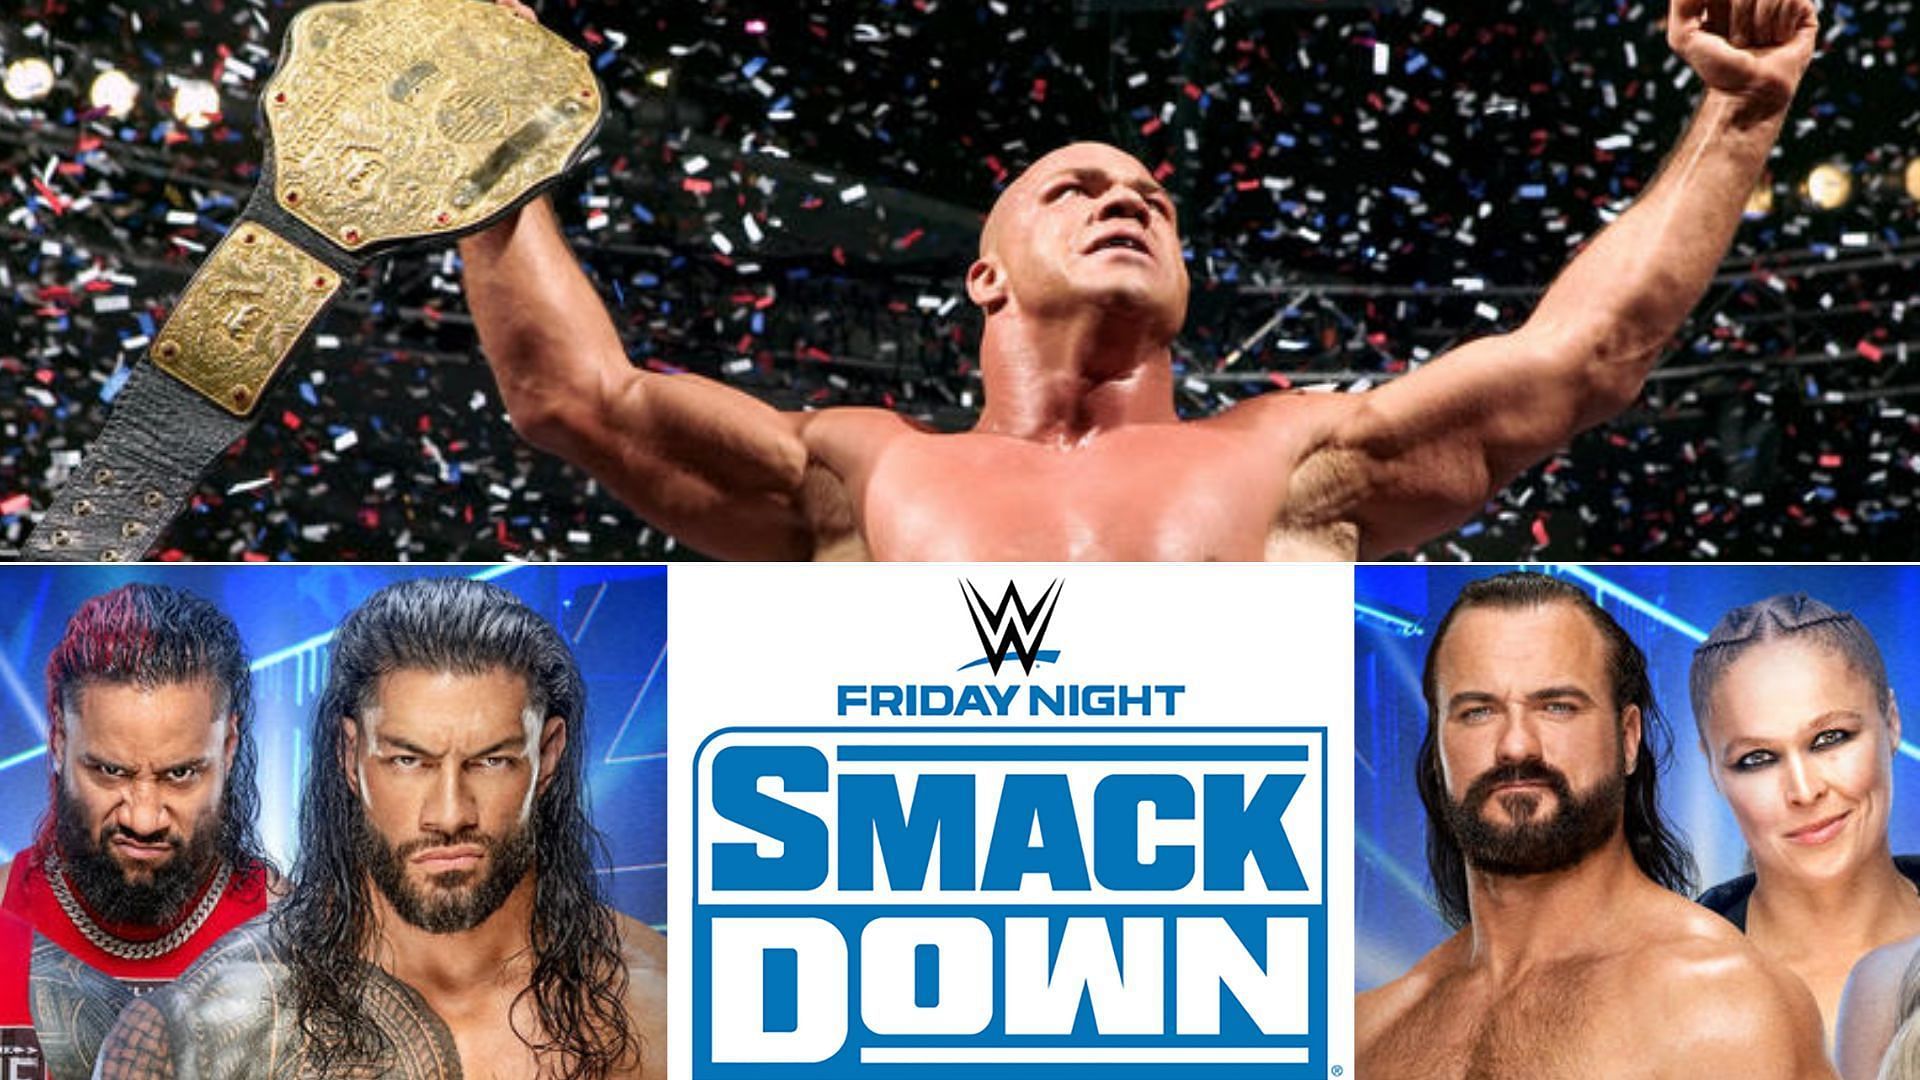 Kurt Angle returns to Friday Night SmackDown and more on Dec 9